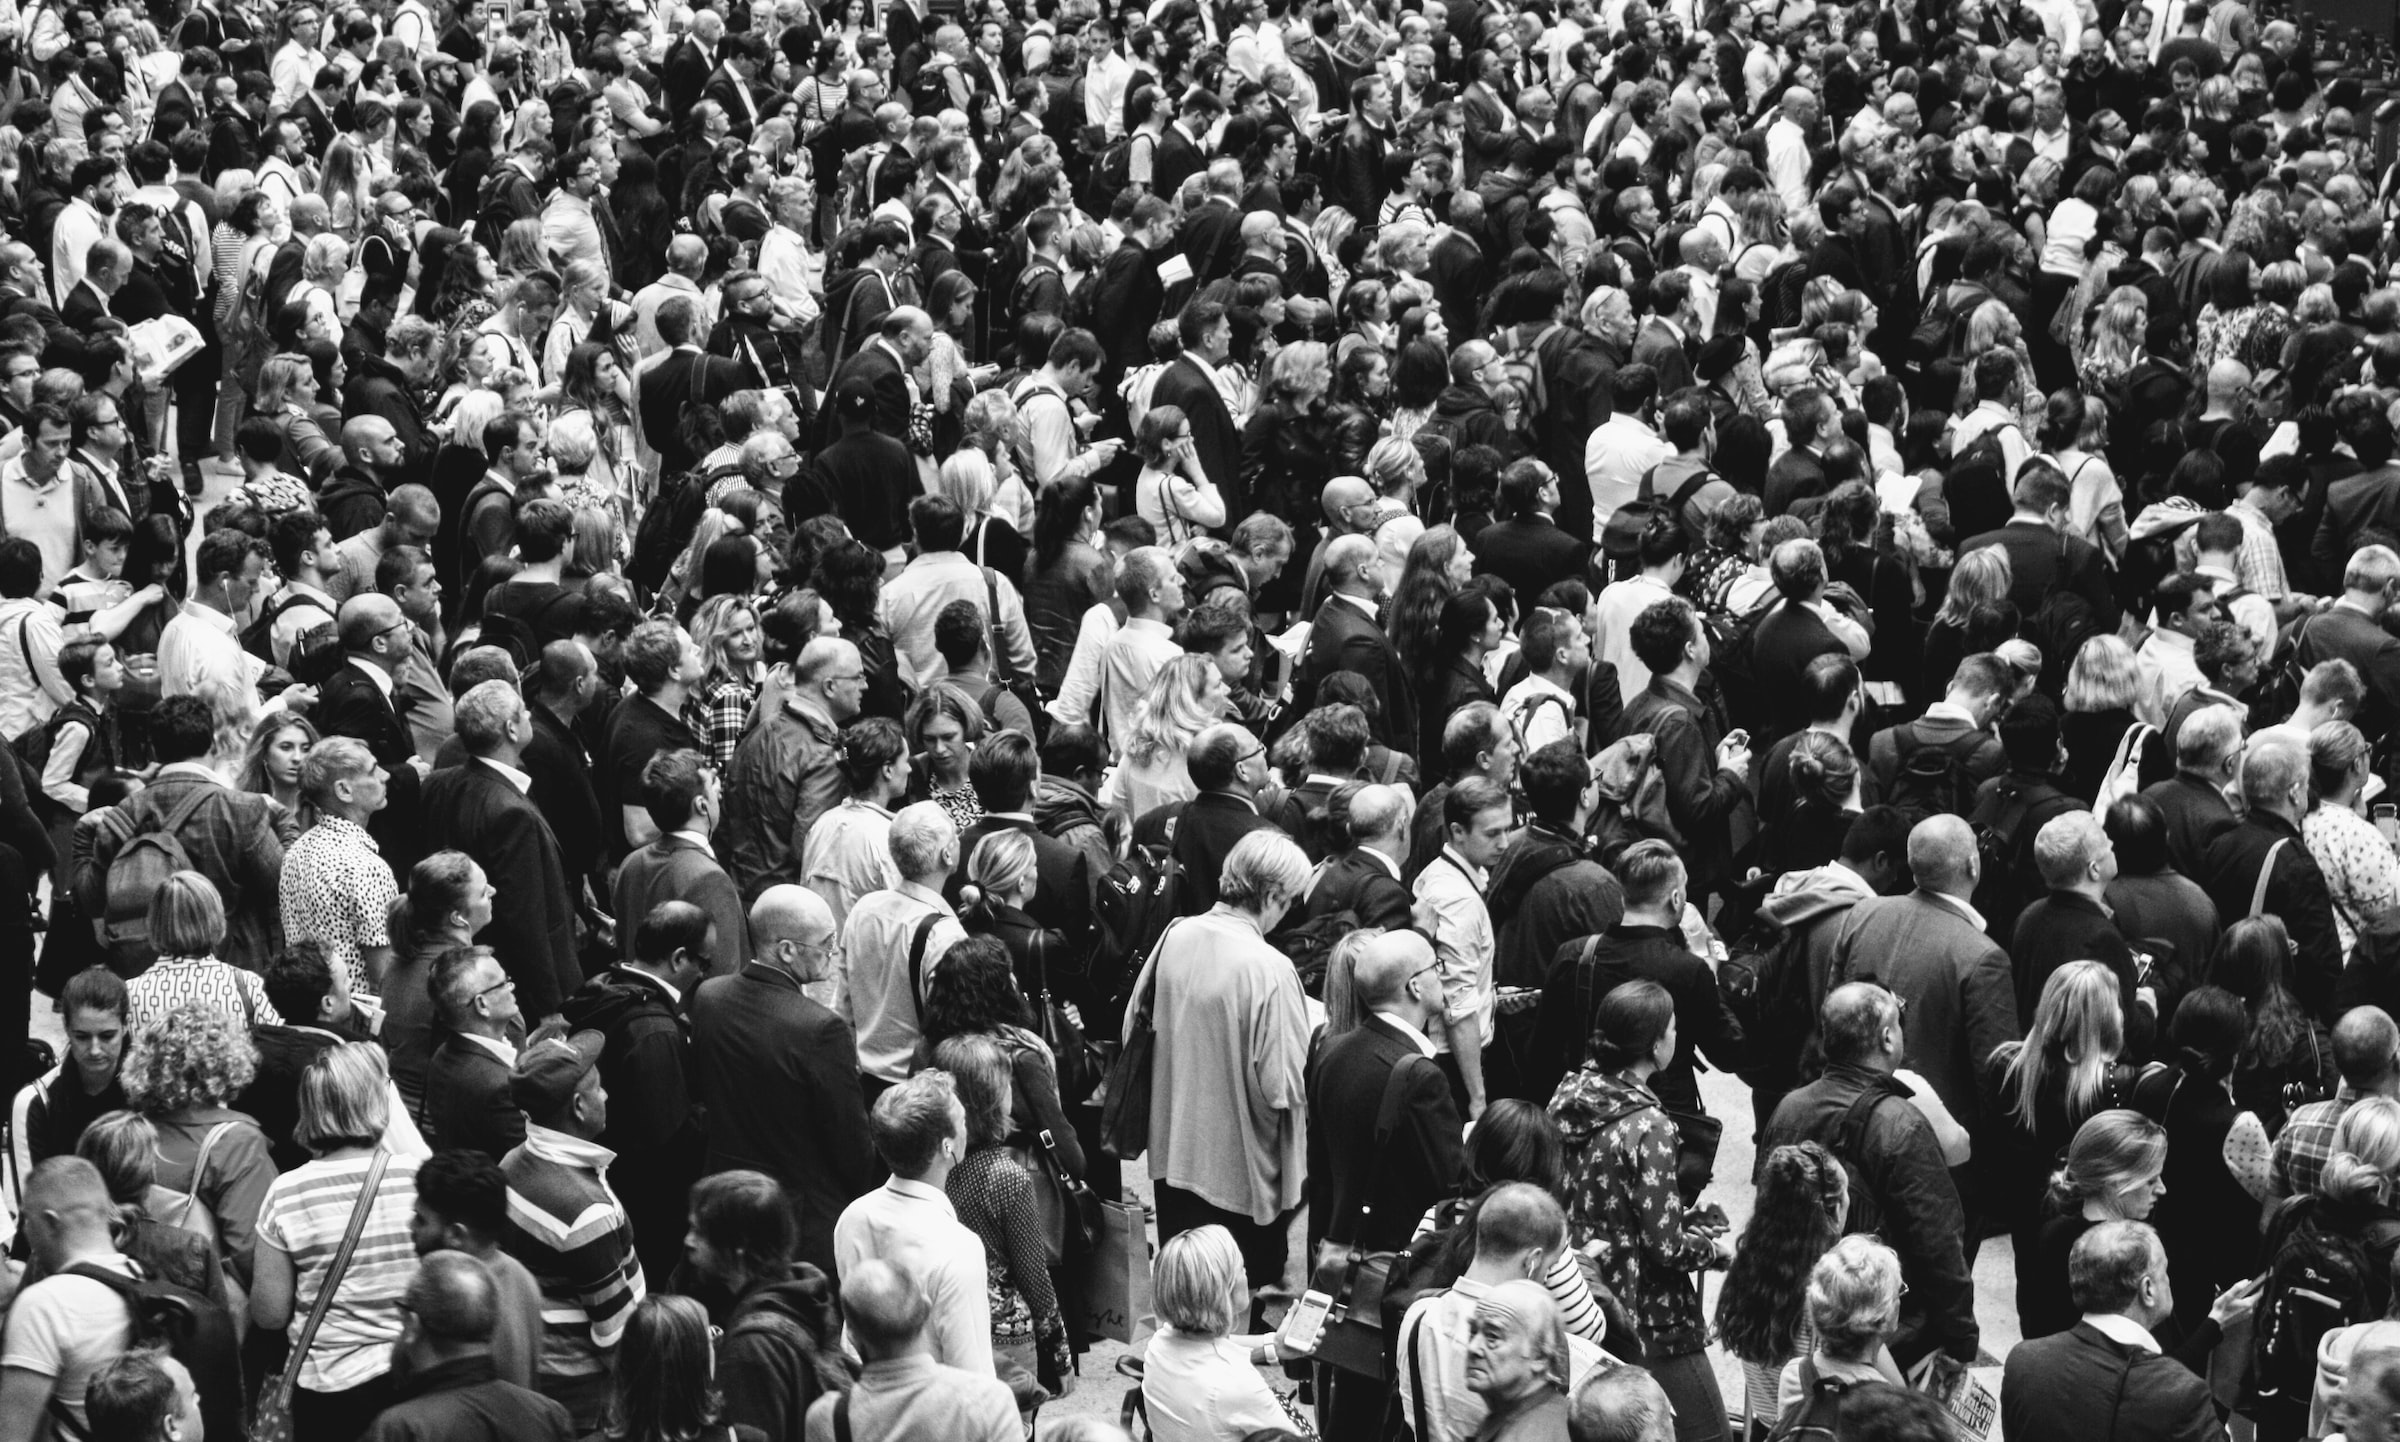 A crowd of people seen from above